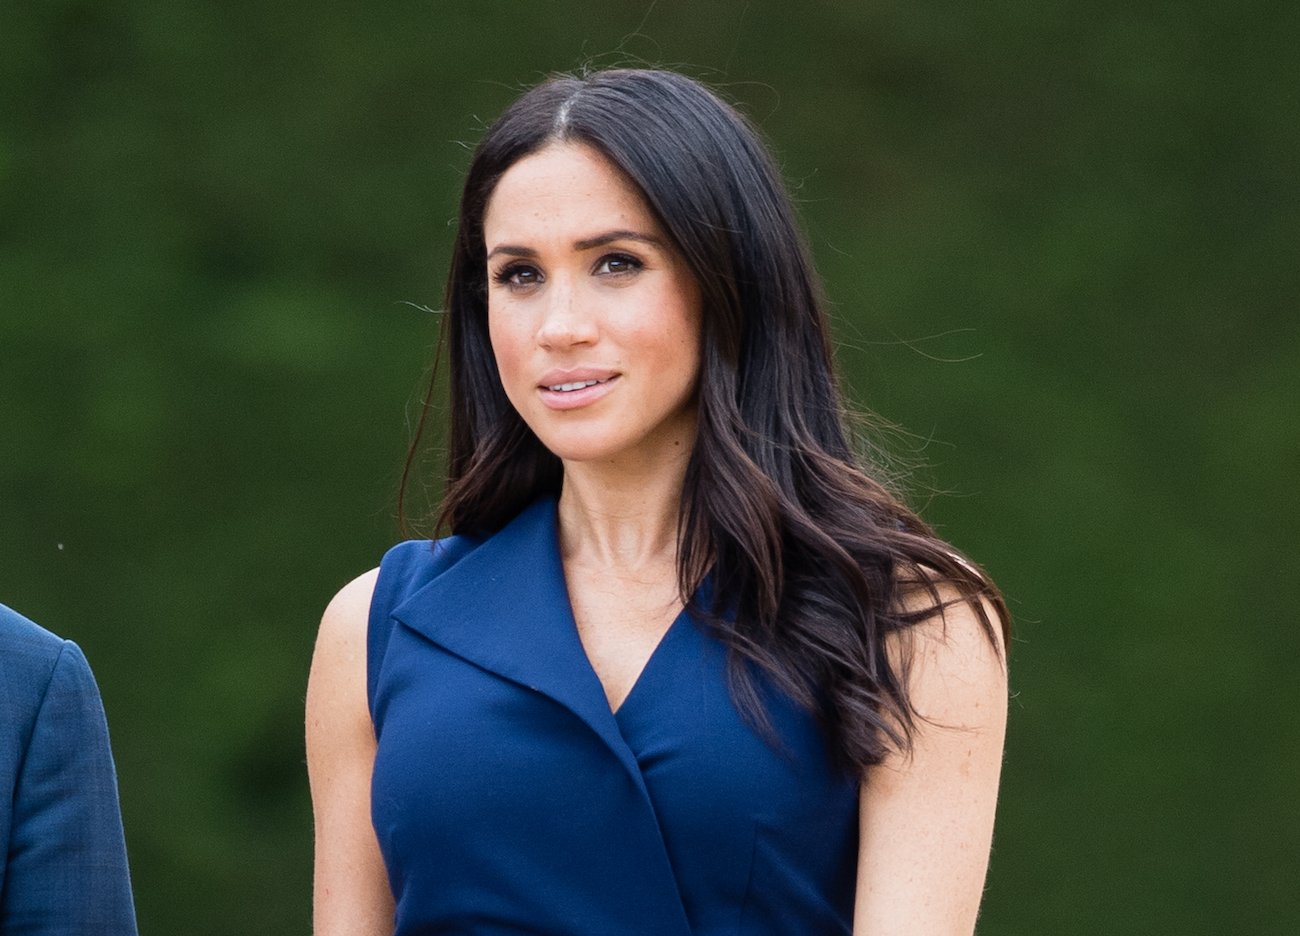 Meghan Markle wearing a sleeveless dark blue dress and looking on